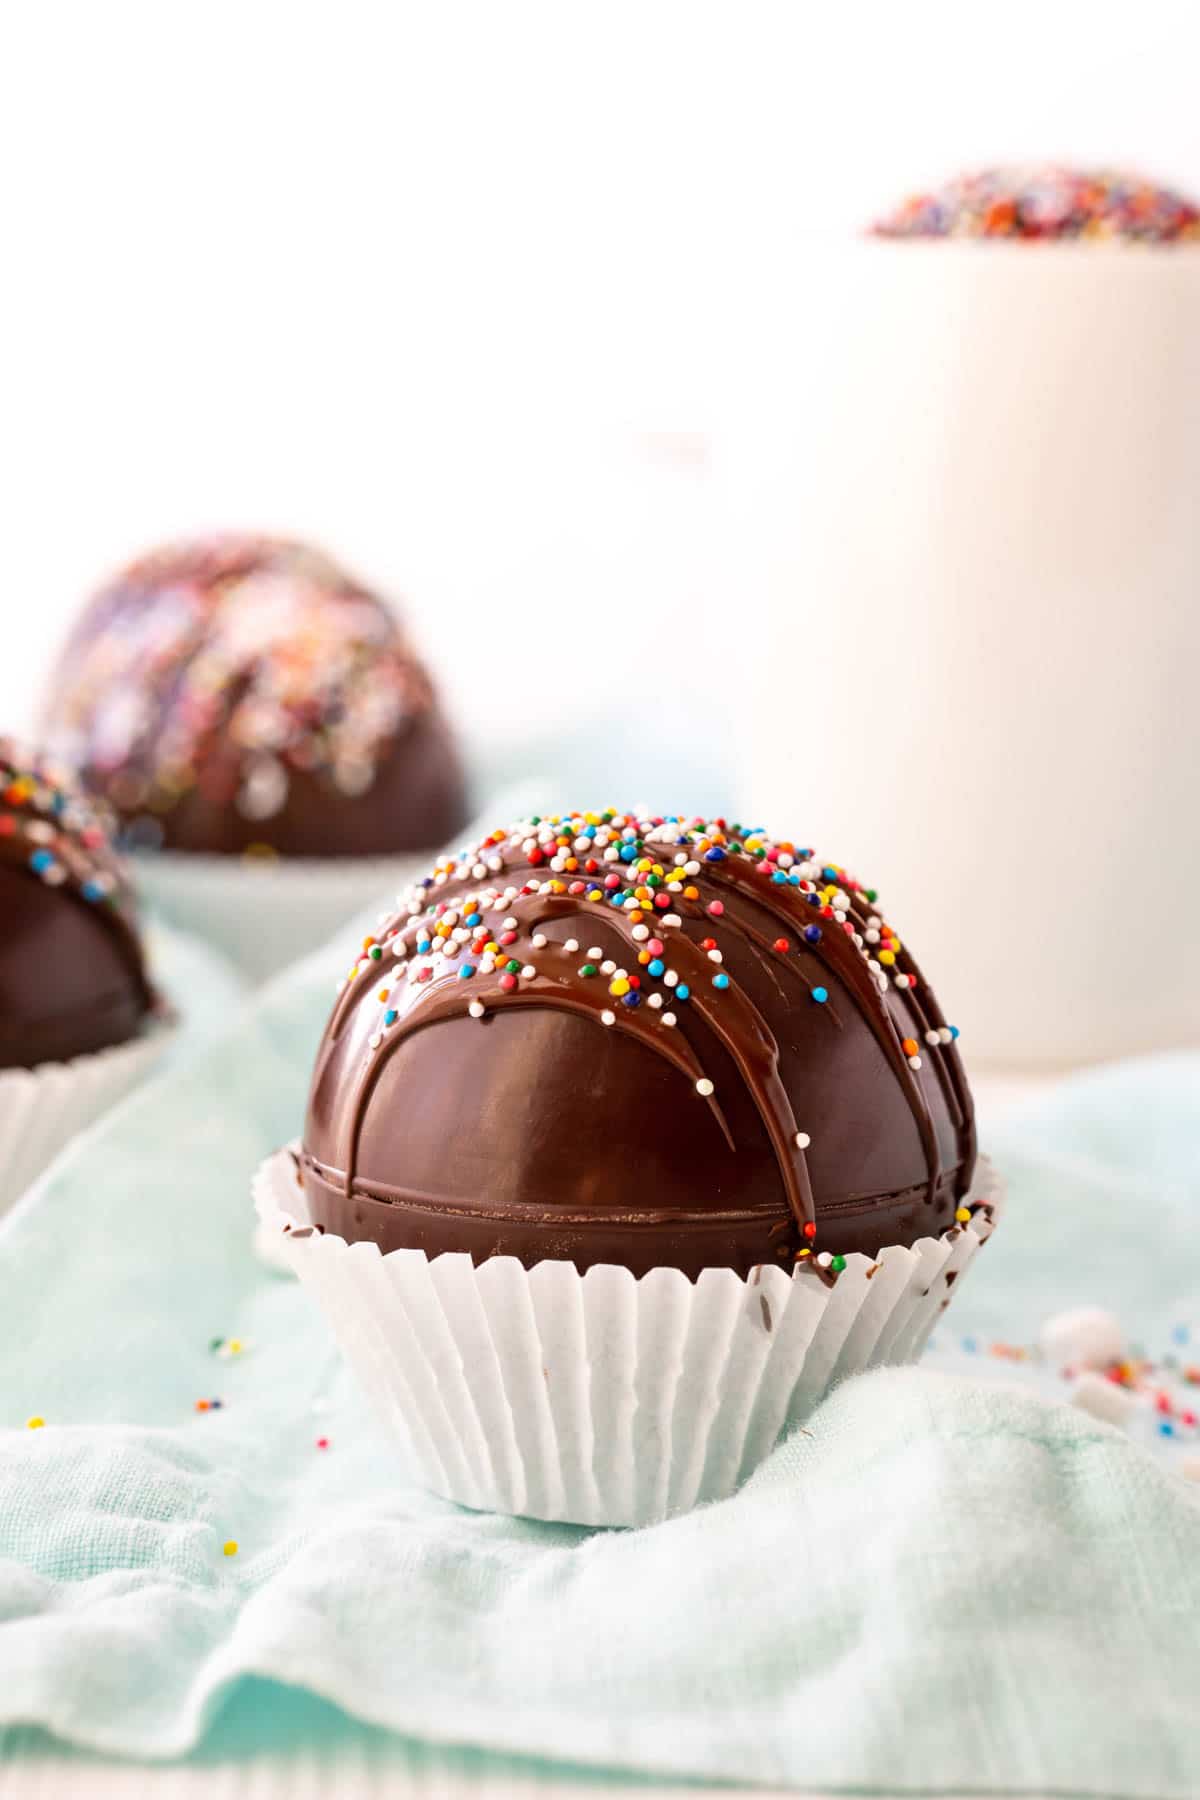 Hot chocolate bombs with sprinkles on top and a glass of milk in the background